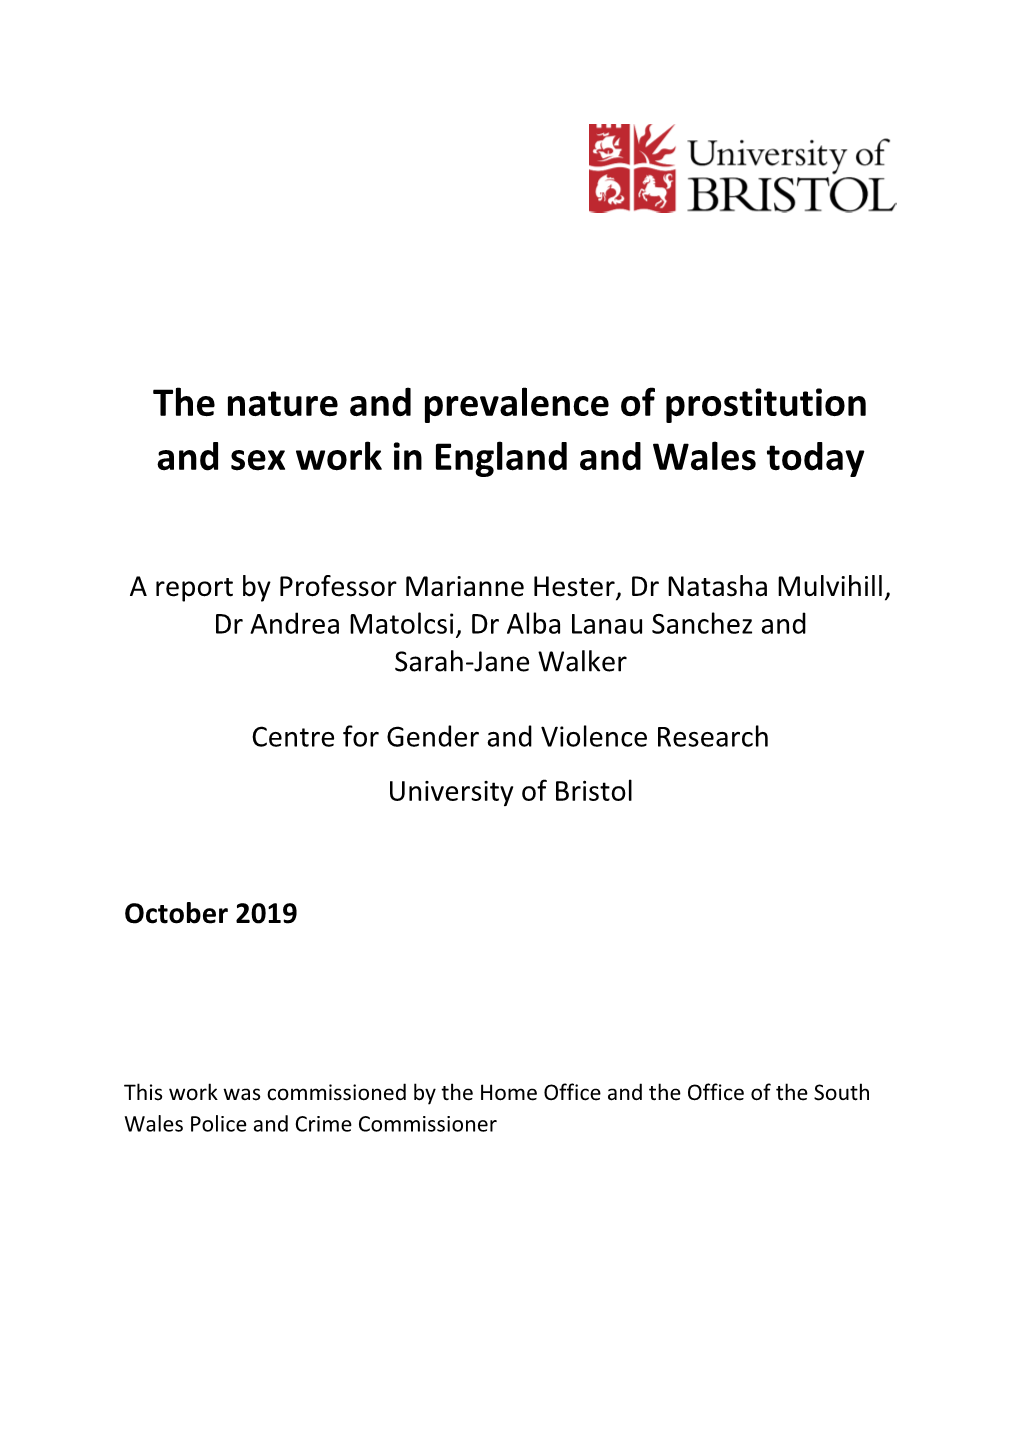 The Nature and Prevalence of Prostitution and Sex Work in England and Wales Today